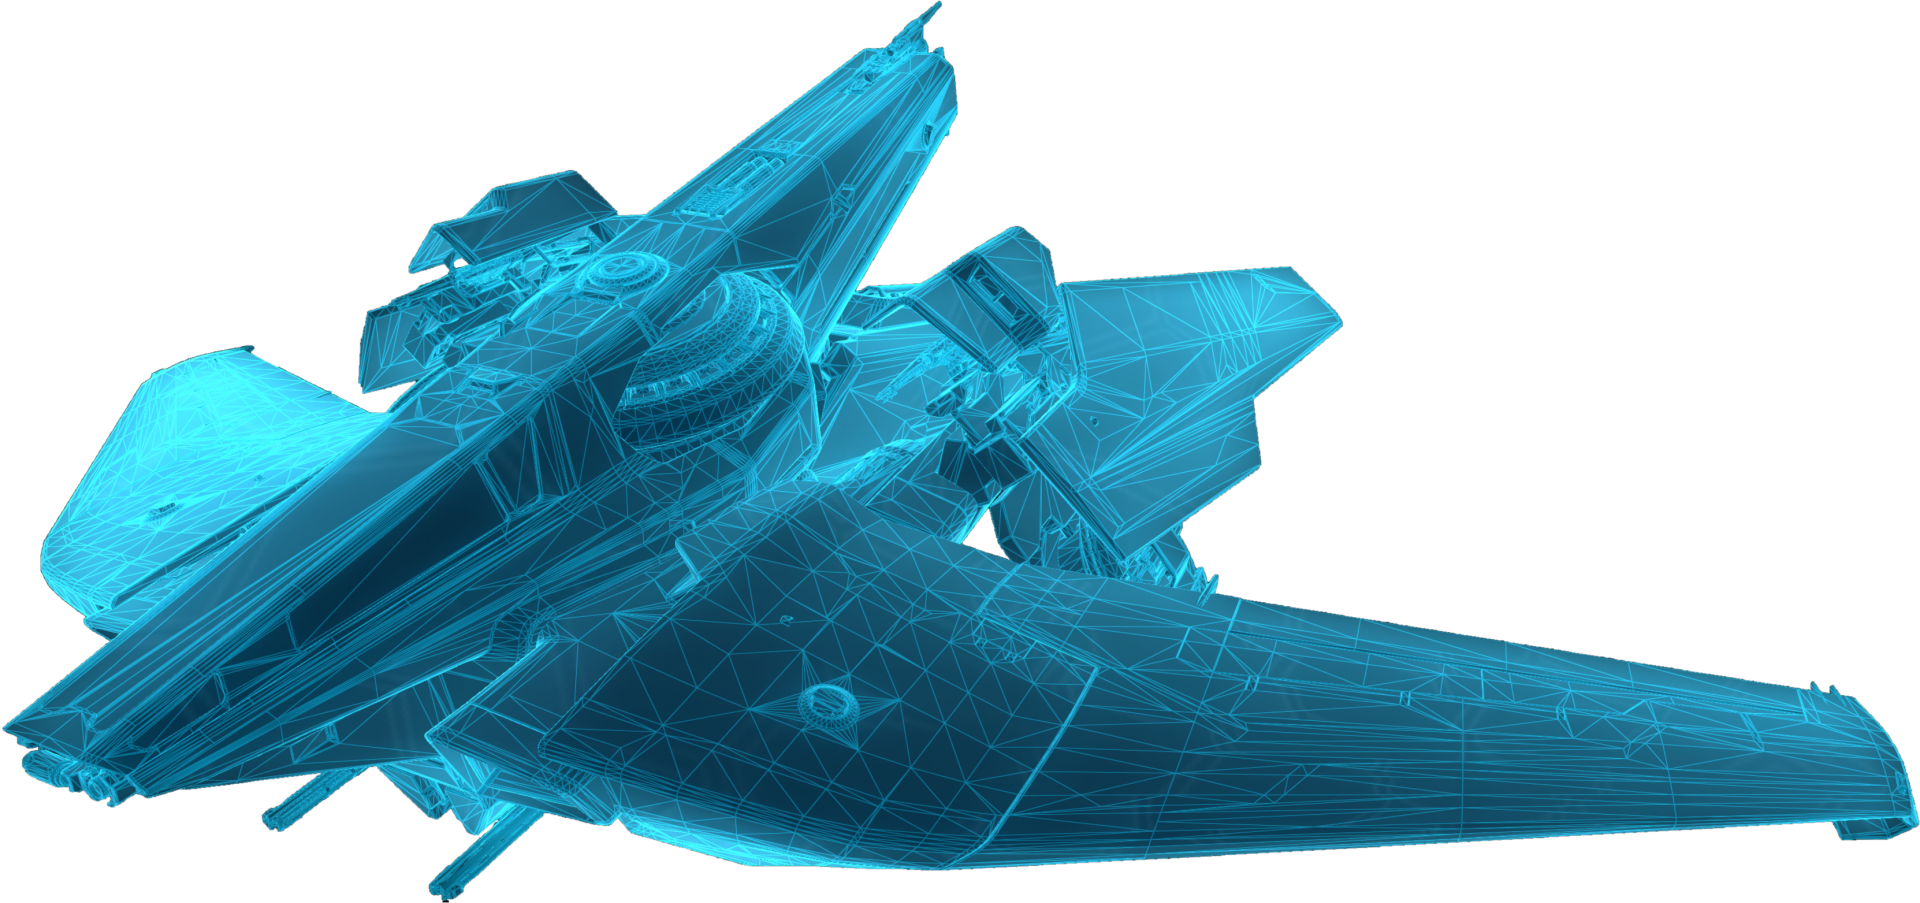 Anvil-Hawk-Holo-Viewer_trans.png